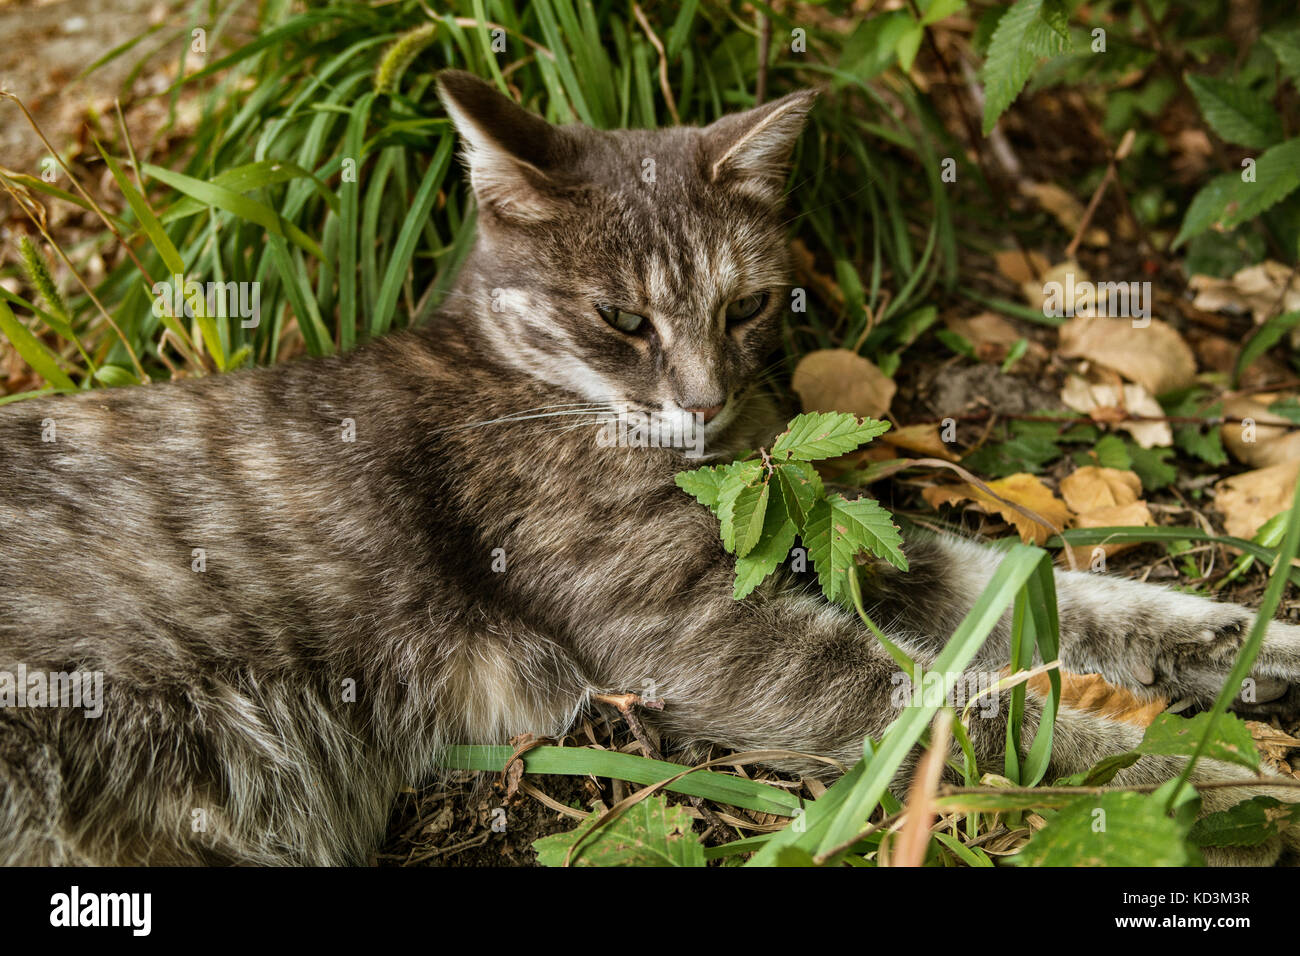 Green-eyed cat. Grey cat. Cat on the green grass. Free cat. Resting cat. Looking cat. Cat portrait. Stock Photo